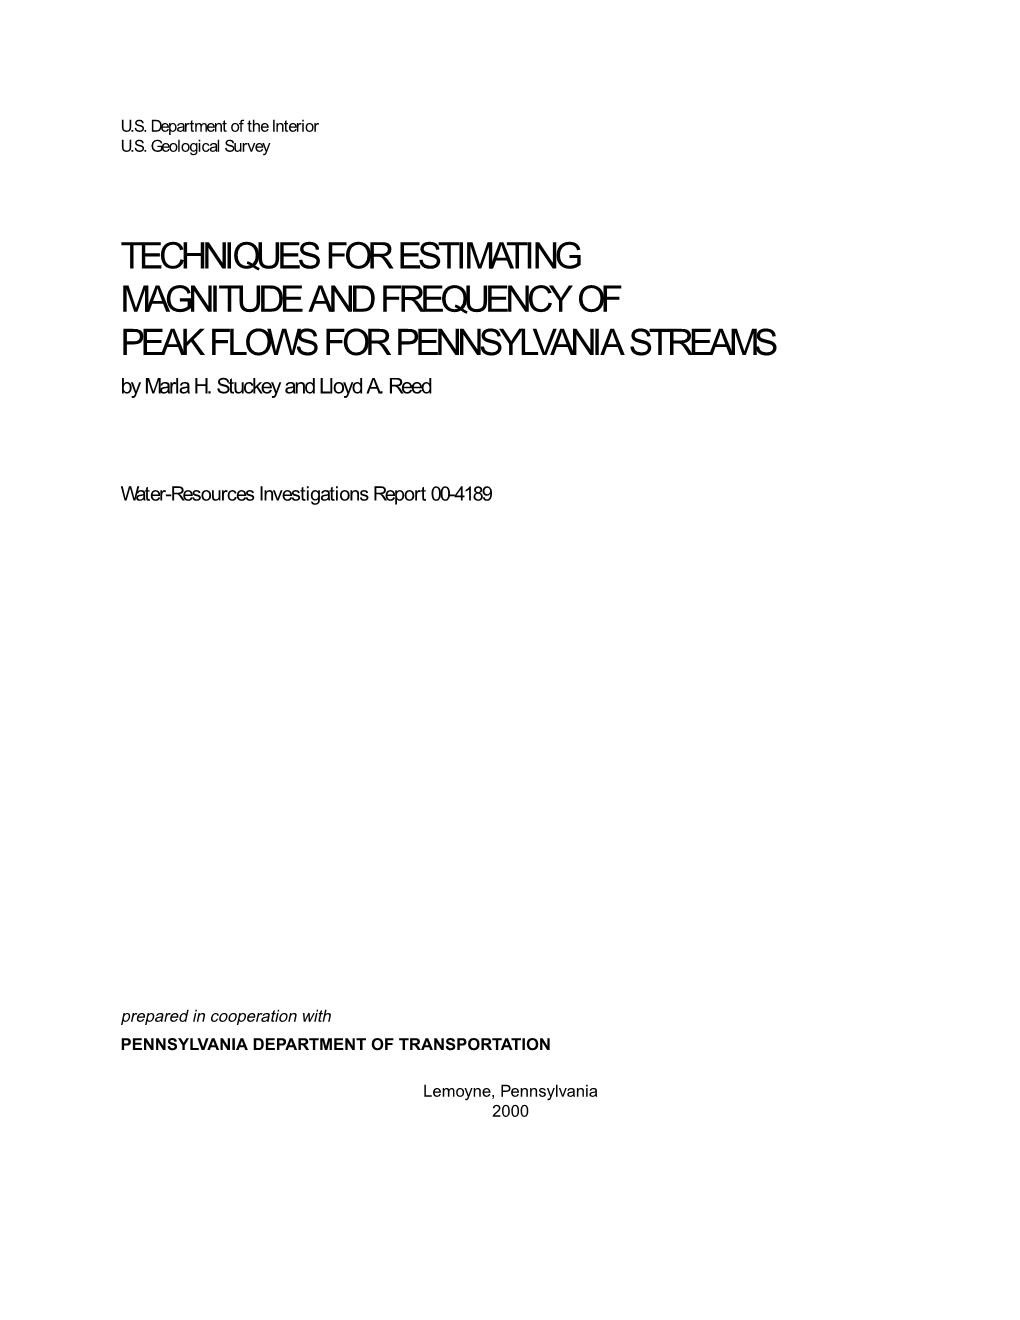 TECHNIQUES for ESTIMATING MAGNITUDE and FREQUENCY of PEAK FLOWS for PENNSYLVANIA STREAMS by Marla H